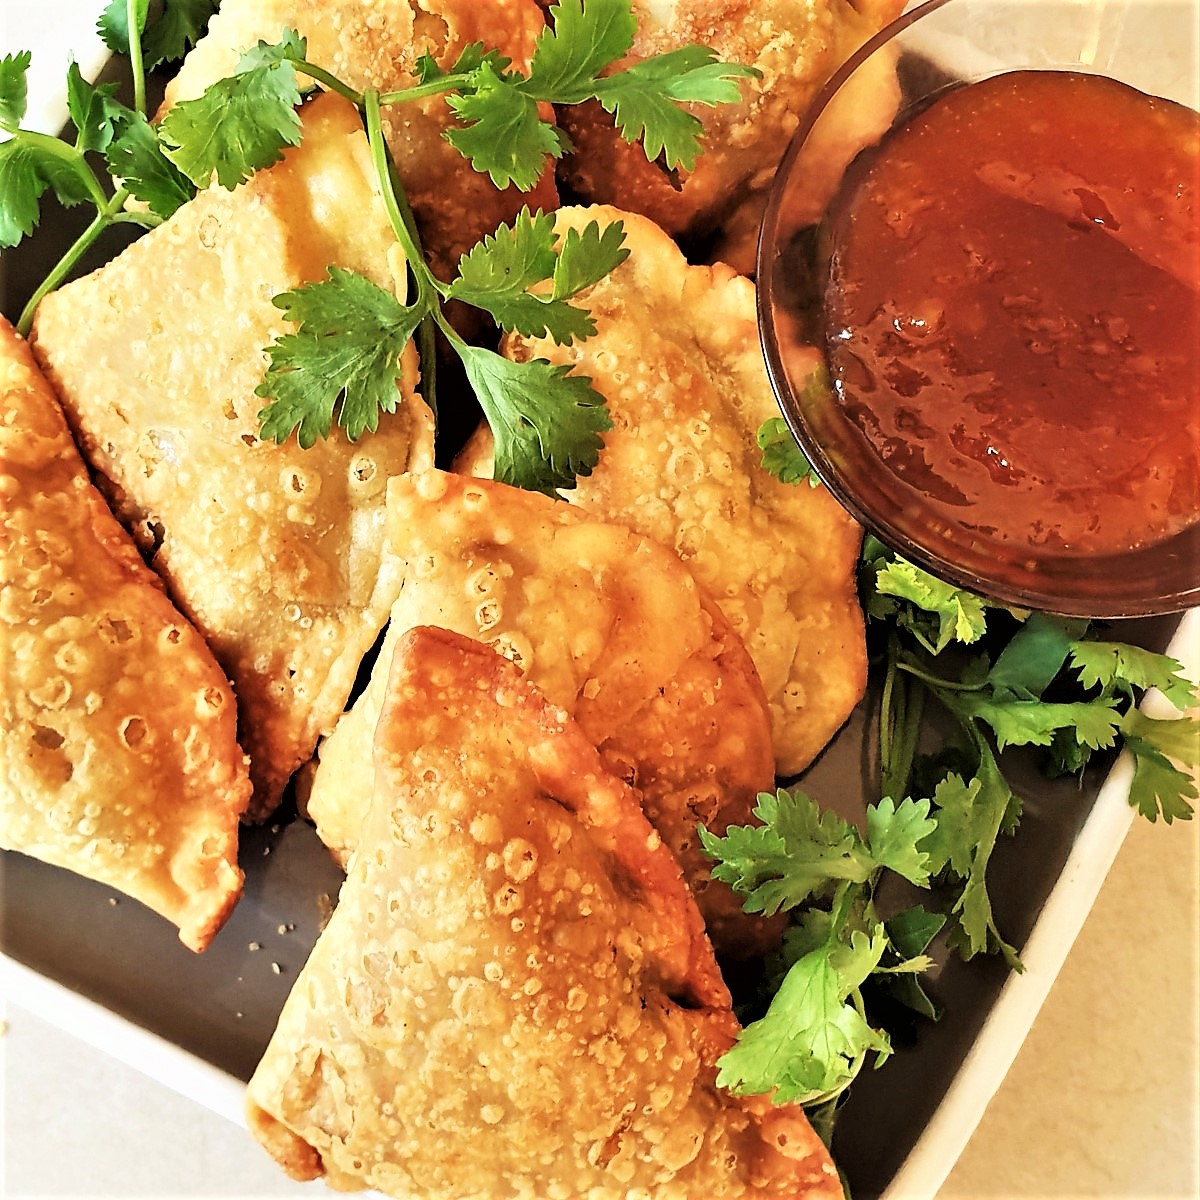 A plate of samosas with beef, pea and potato filling.